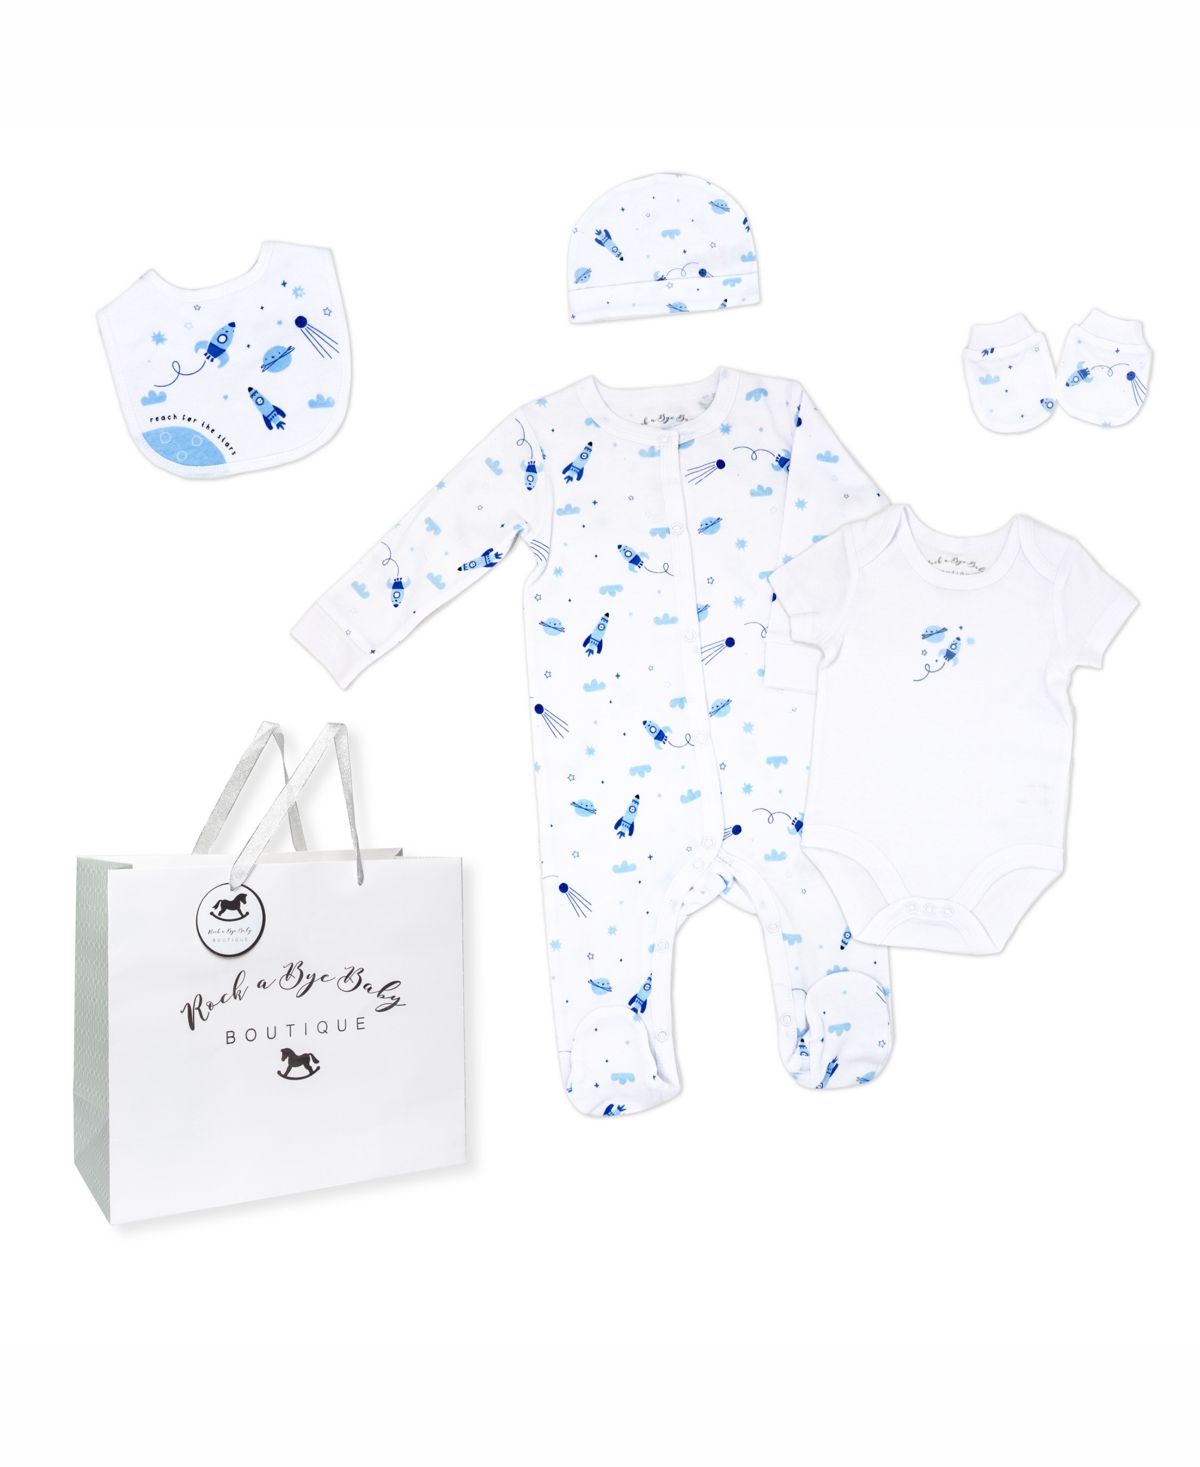 Rock-a-bye Baby Boutique Baby Boys Layette Gift Bag Set In Rocket Ships